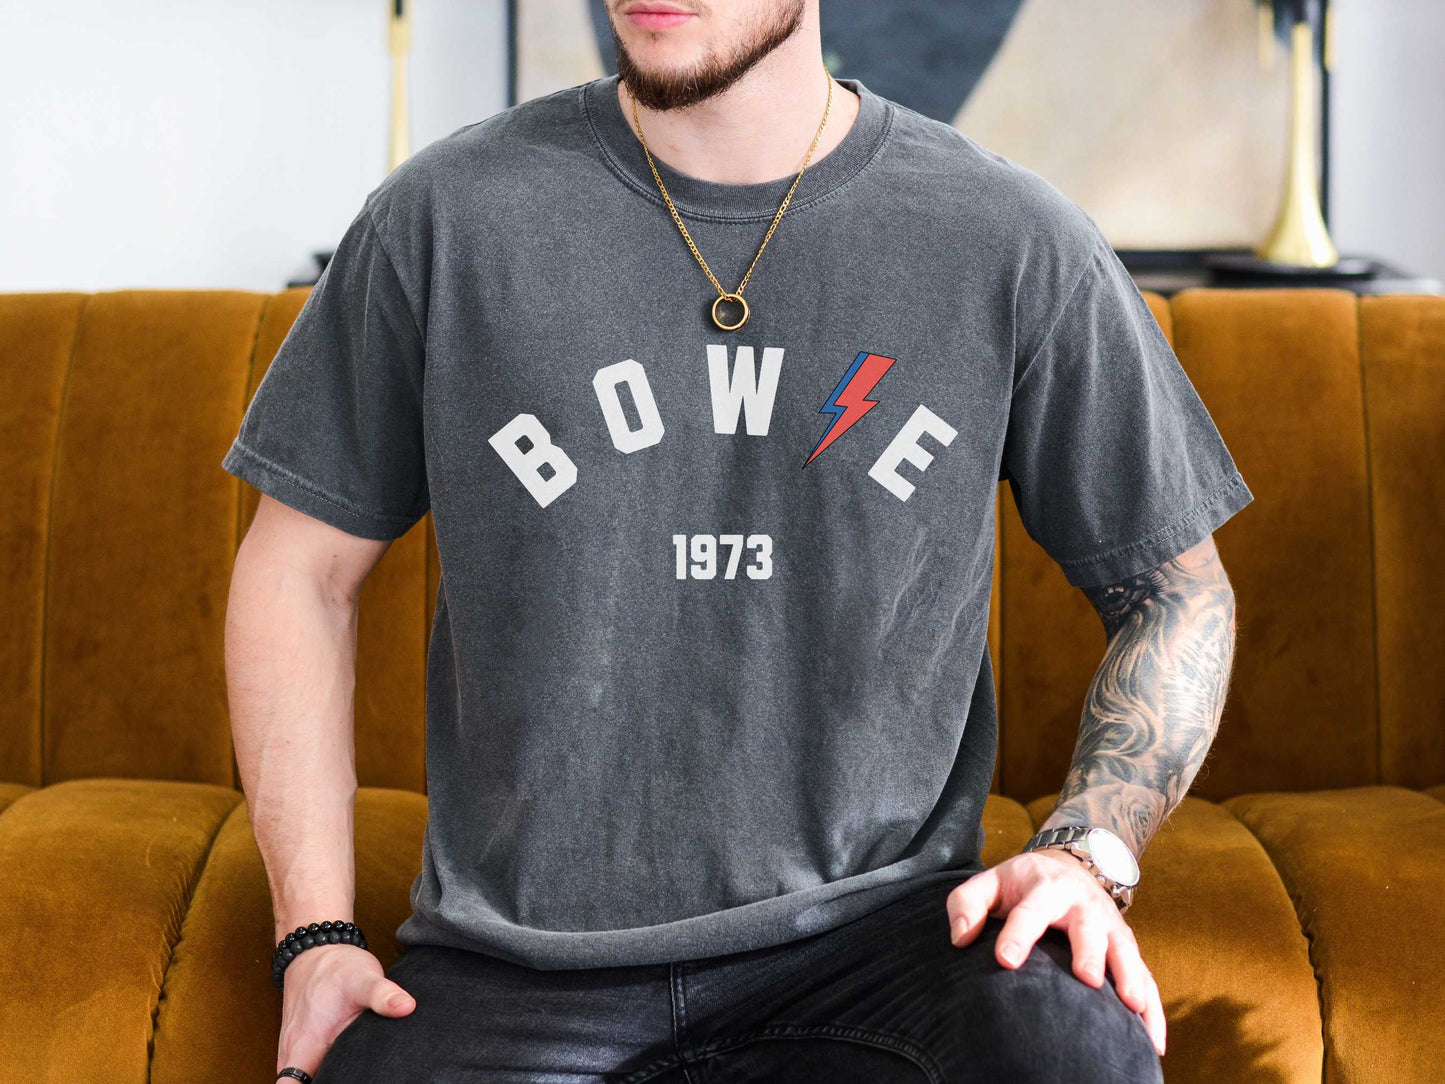 David Bowie "Bowie 1973" T-Shirt in Pepper